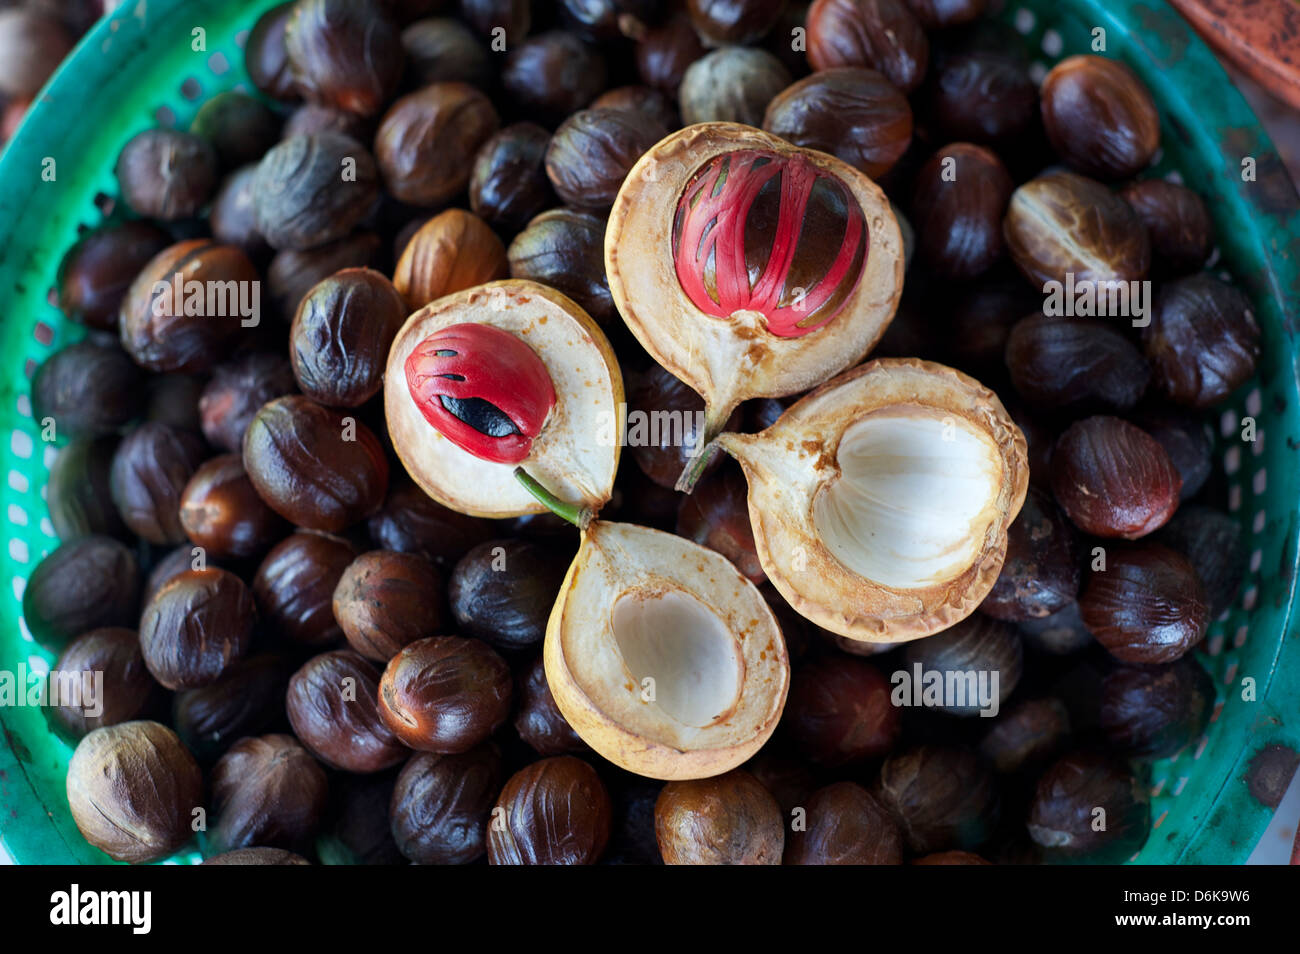 Male and female nutmegs, rind split open to reveal mace wrapped round nutmegs inside, Penang, Malaysia, Southeast Asia, Asia Stock Photo